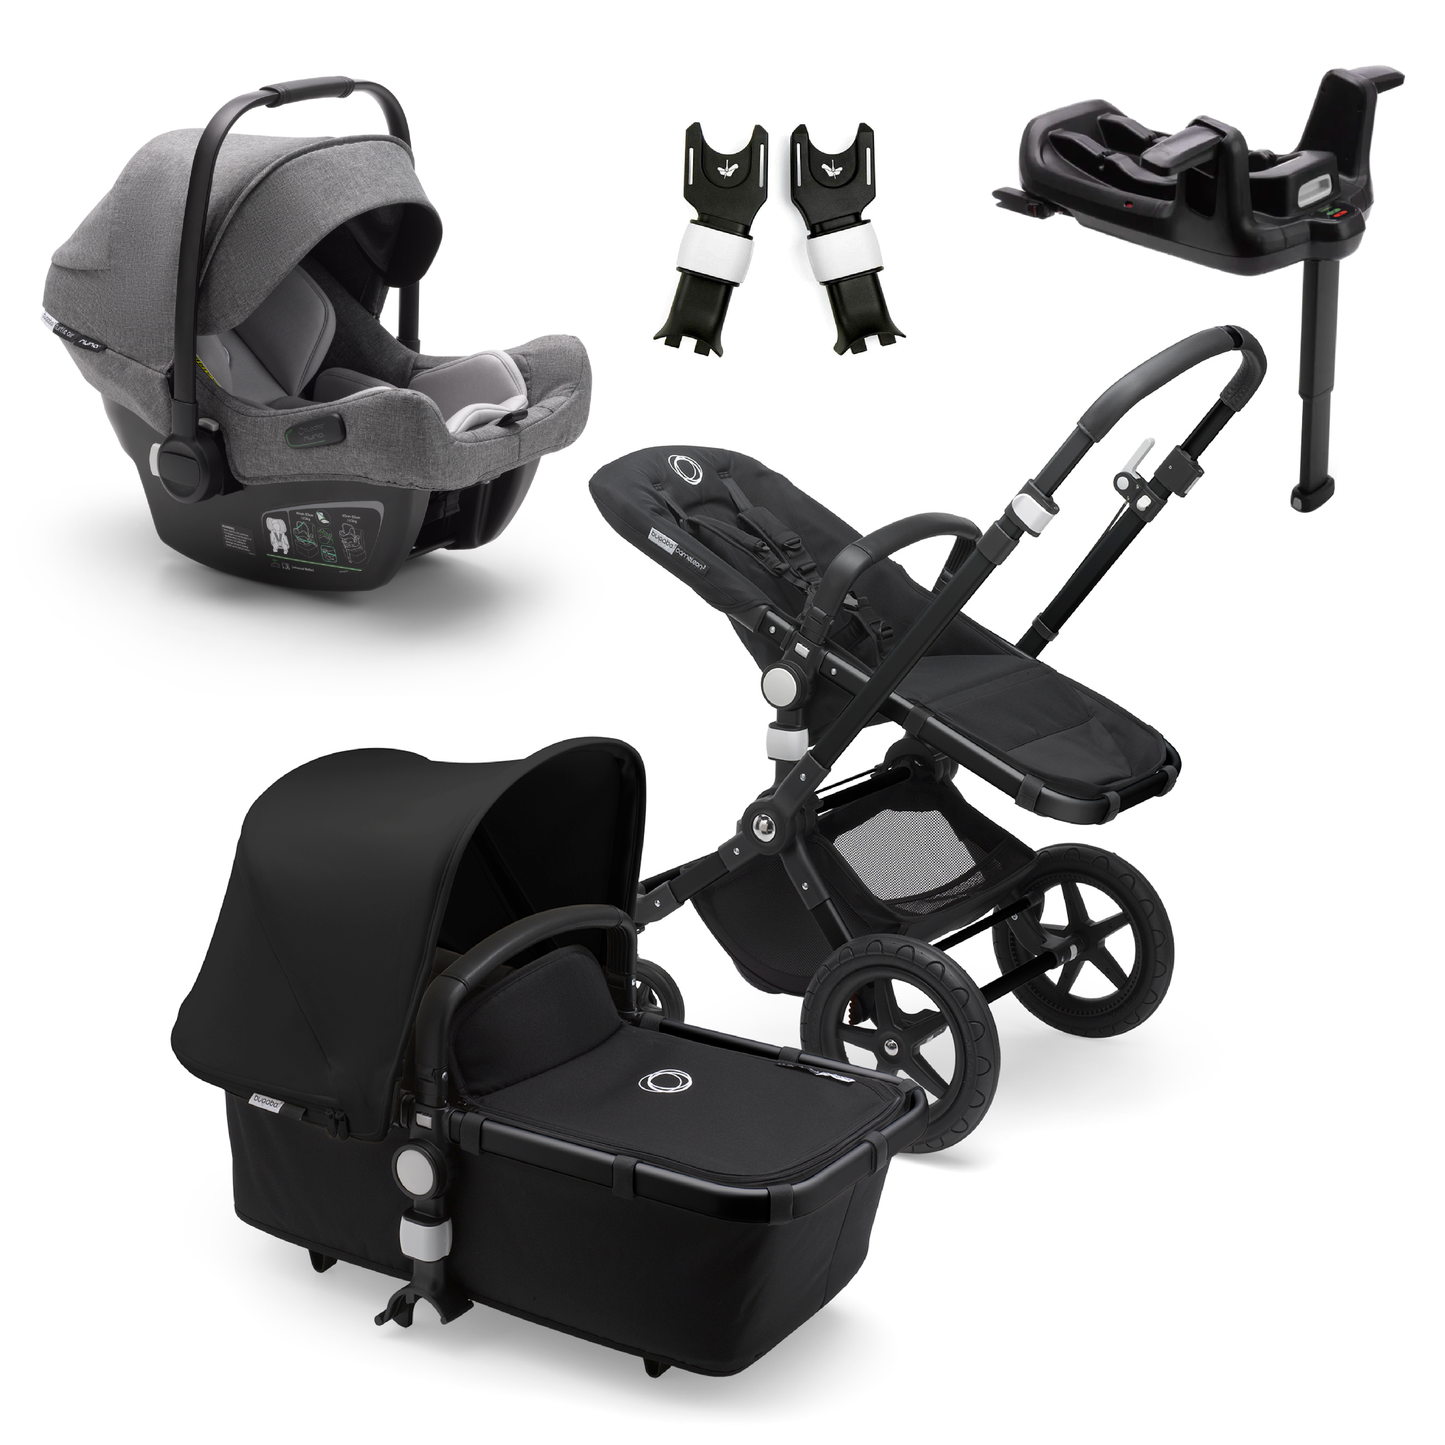 Bugaboo Cameleon 3 Plus with Bugaboo Turtle Car Seat and Base